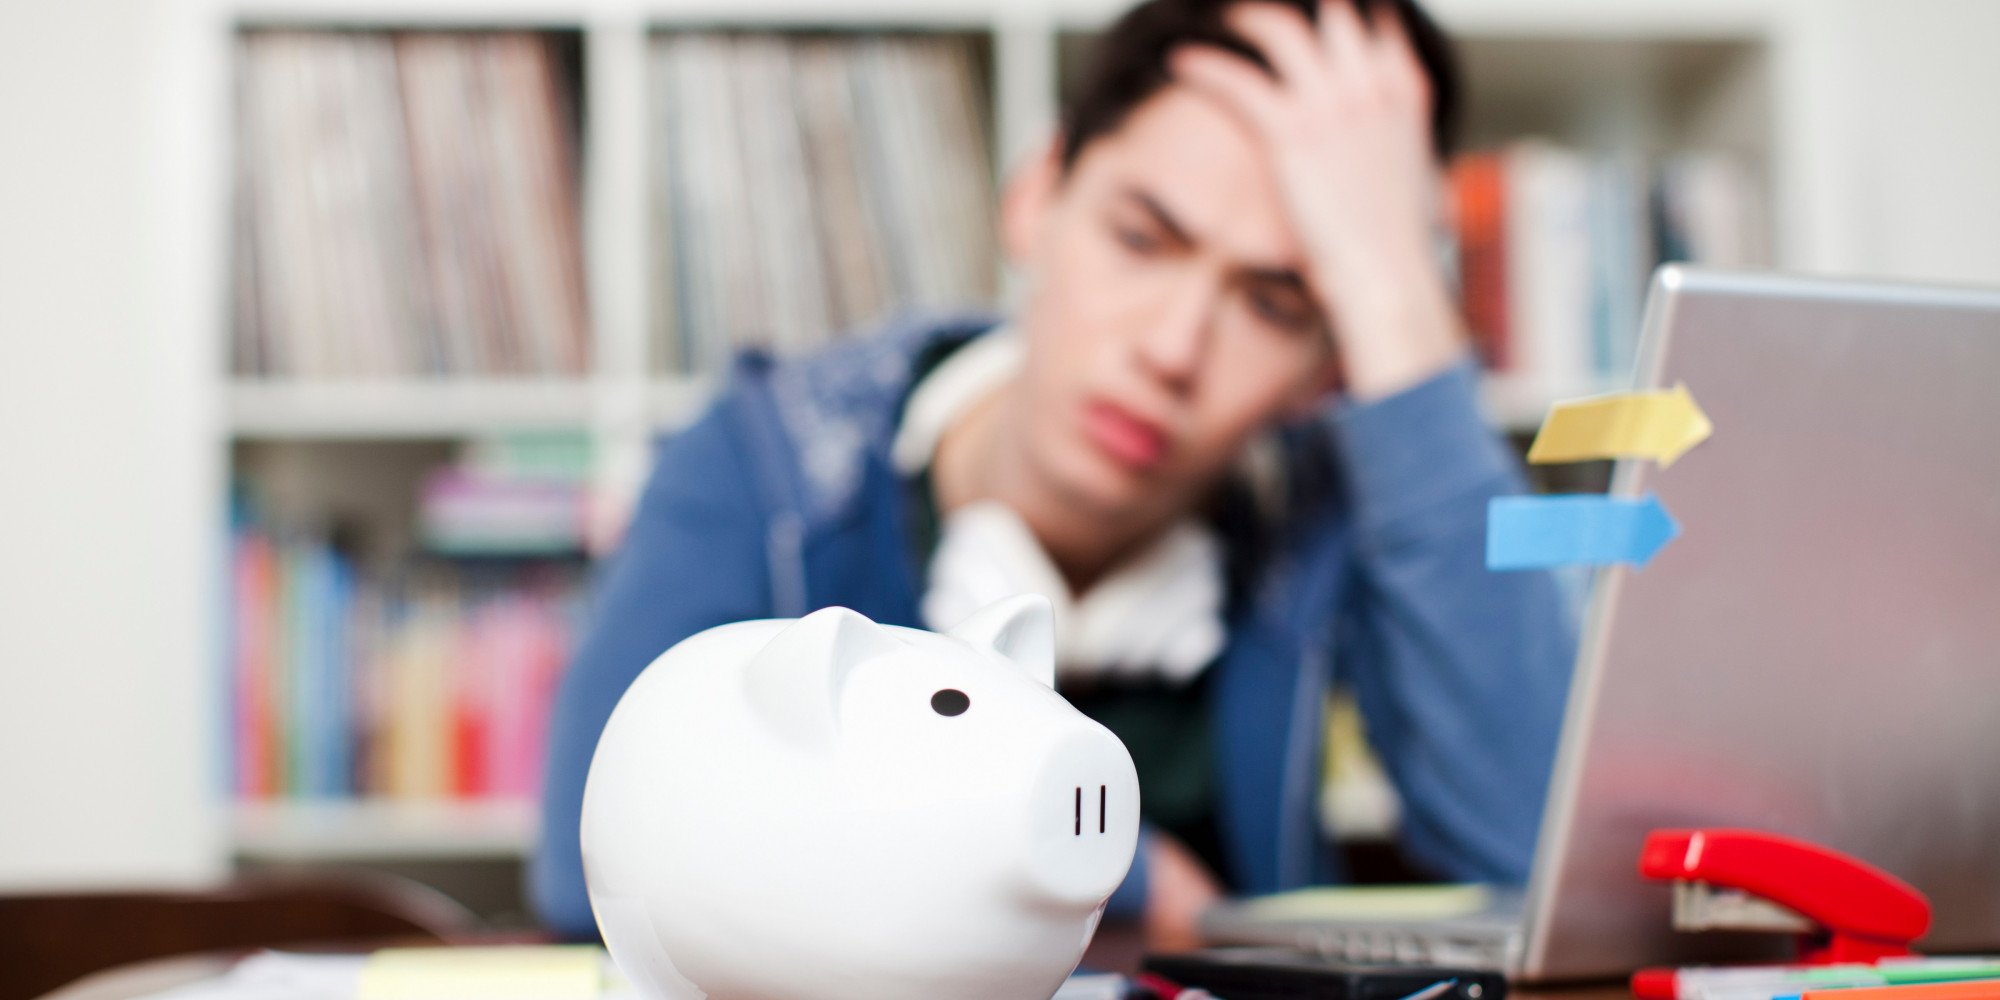 7 ways to save money while at college